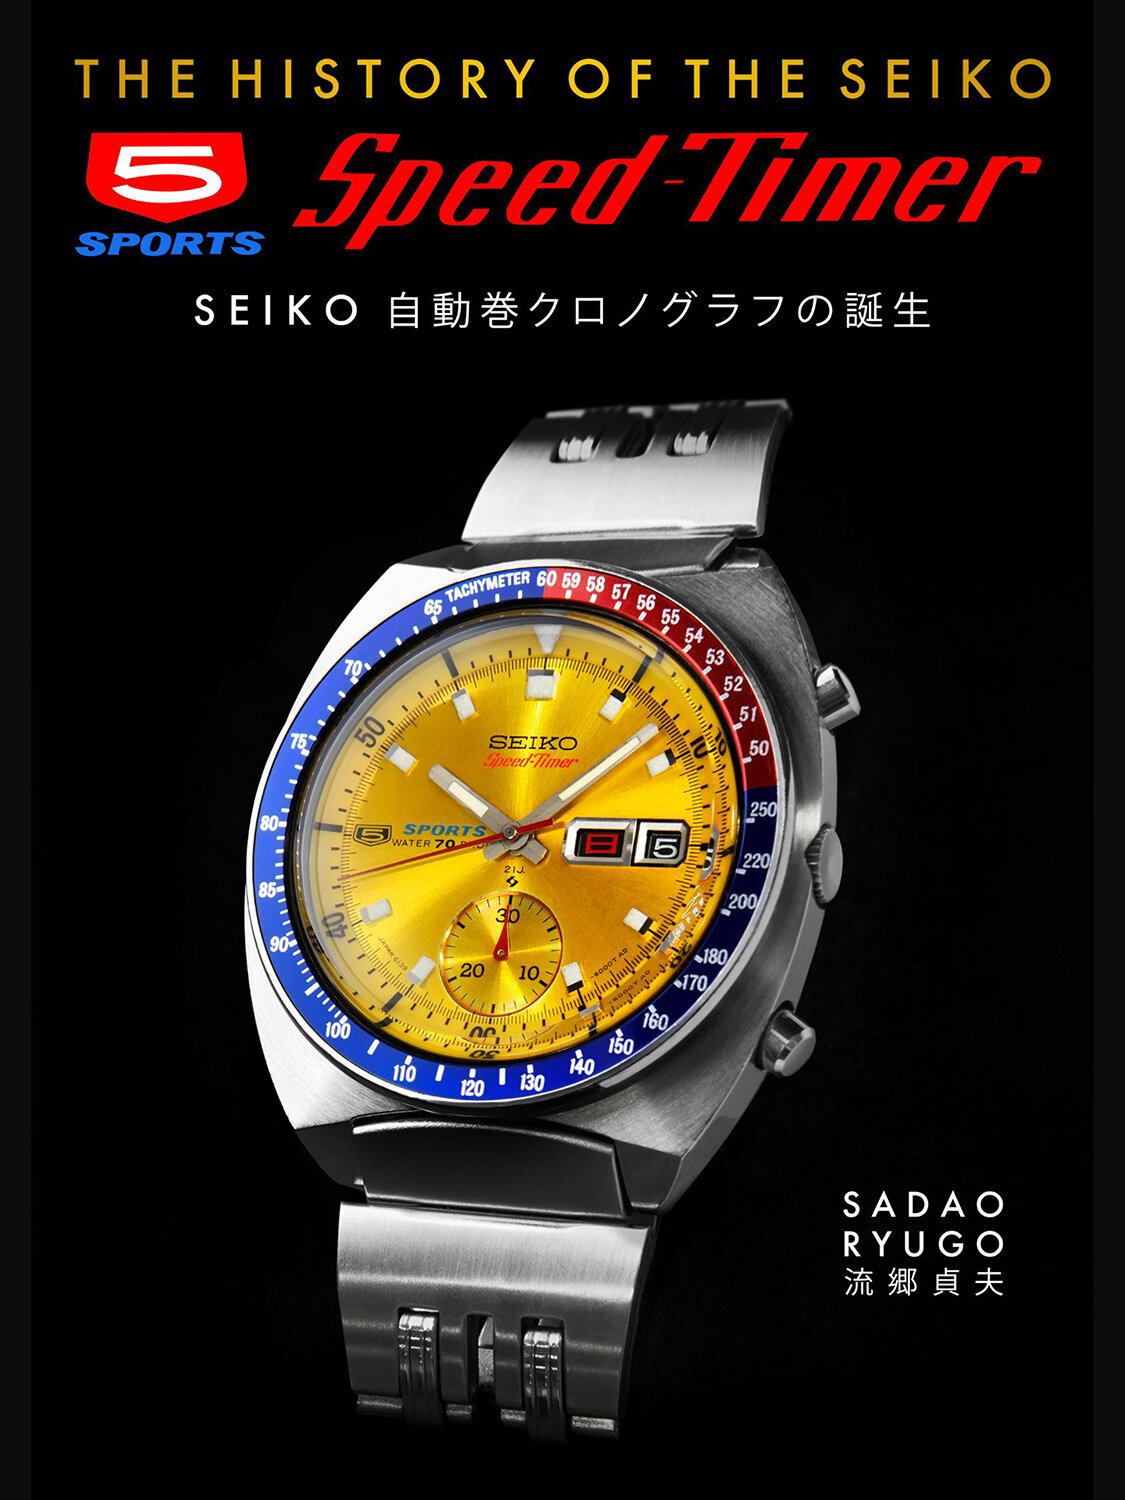 Book: The History of the Seiko 5 Sports Speed-Timer — Plus9Time